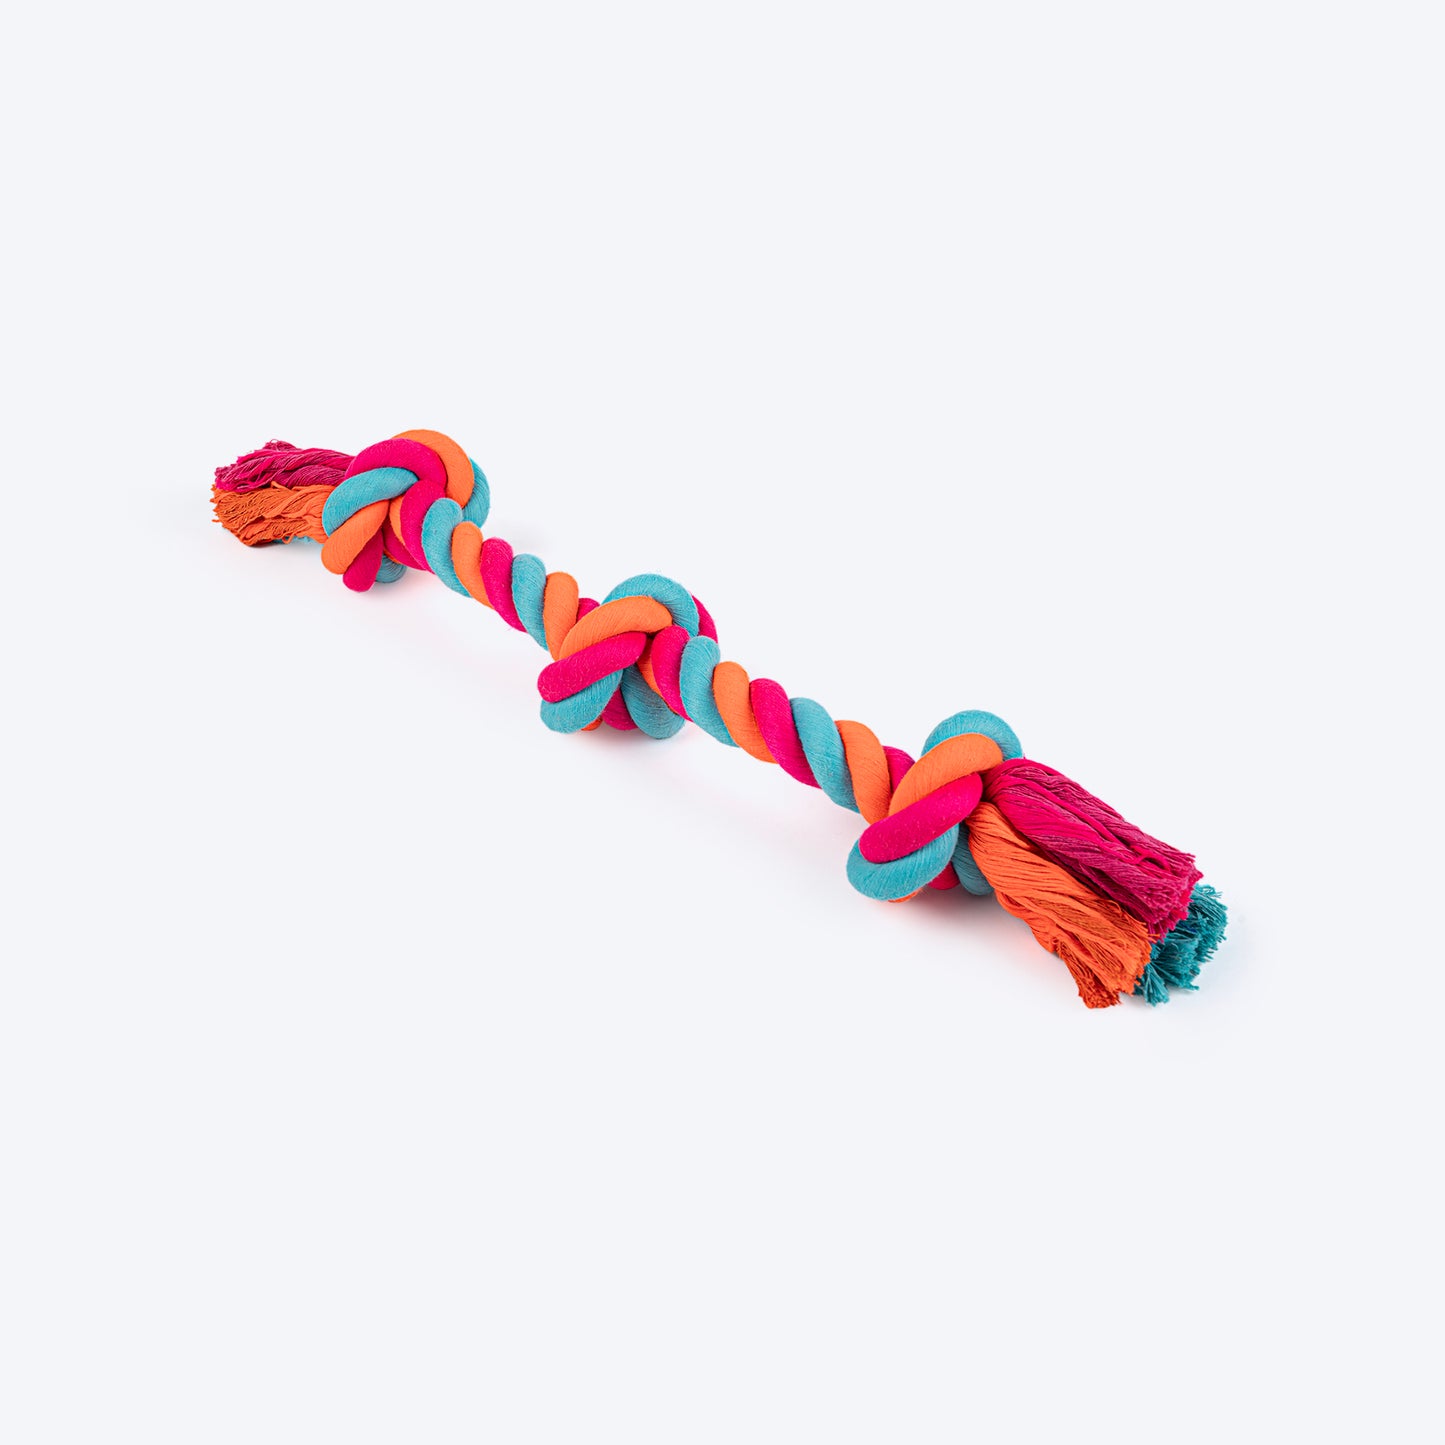 HUFT Tuggables 3 Knots Rope Toy For Dog - Multicolor - Heads Up For Tails